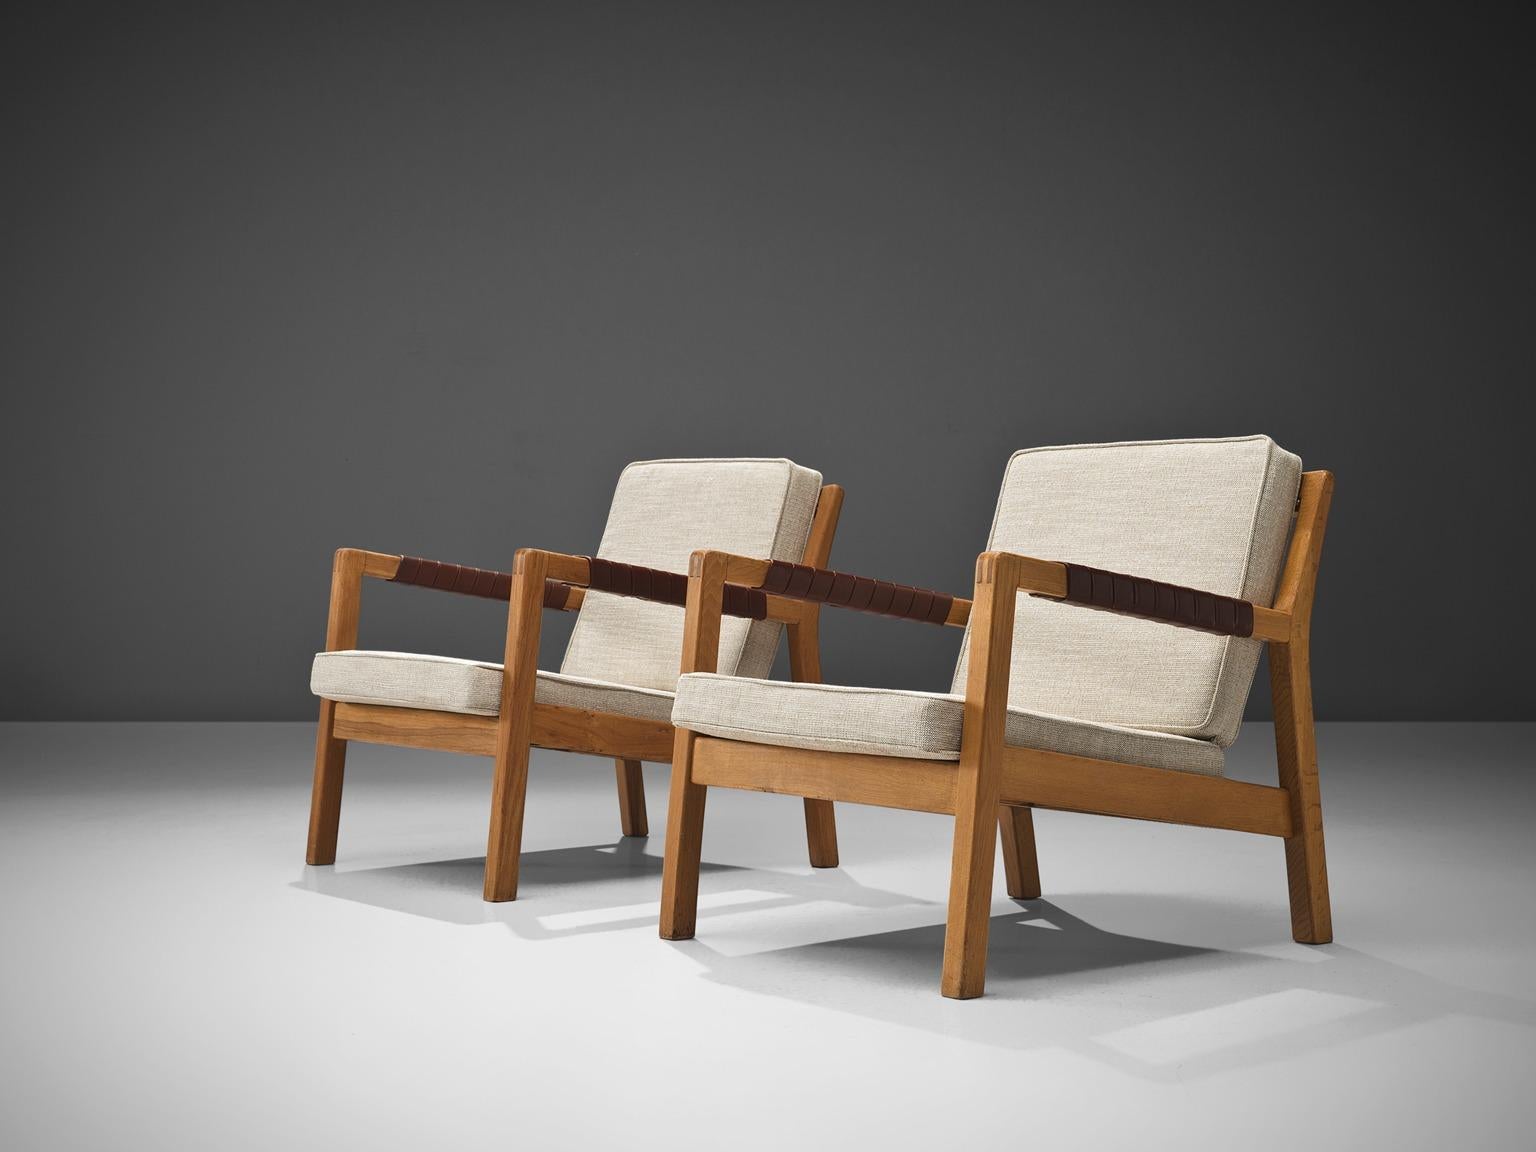 Carl-Gustaf Hiort af Ornäs, 'Rialto' armchairs, oak, brown leather, white or beige wool, Finland, 1957.

This pair of armchairs is designed by Carl-Gustaf Hiort. The chairs are named 'Rialto'. The backs and armrest are made of brown leather. The